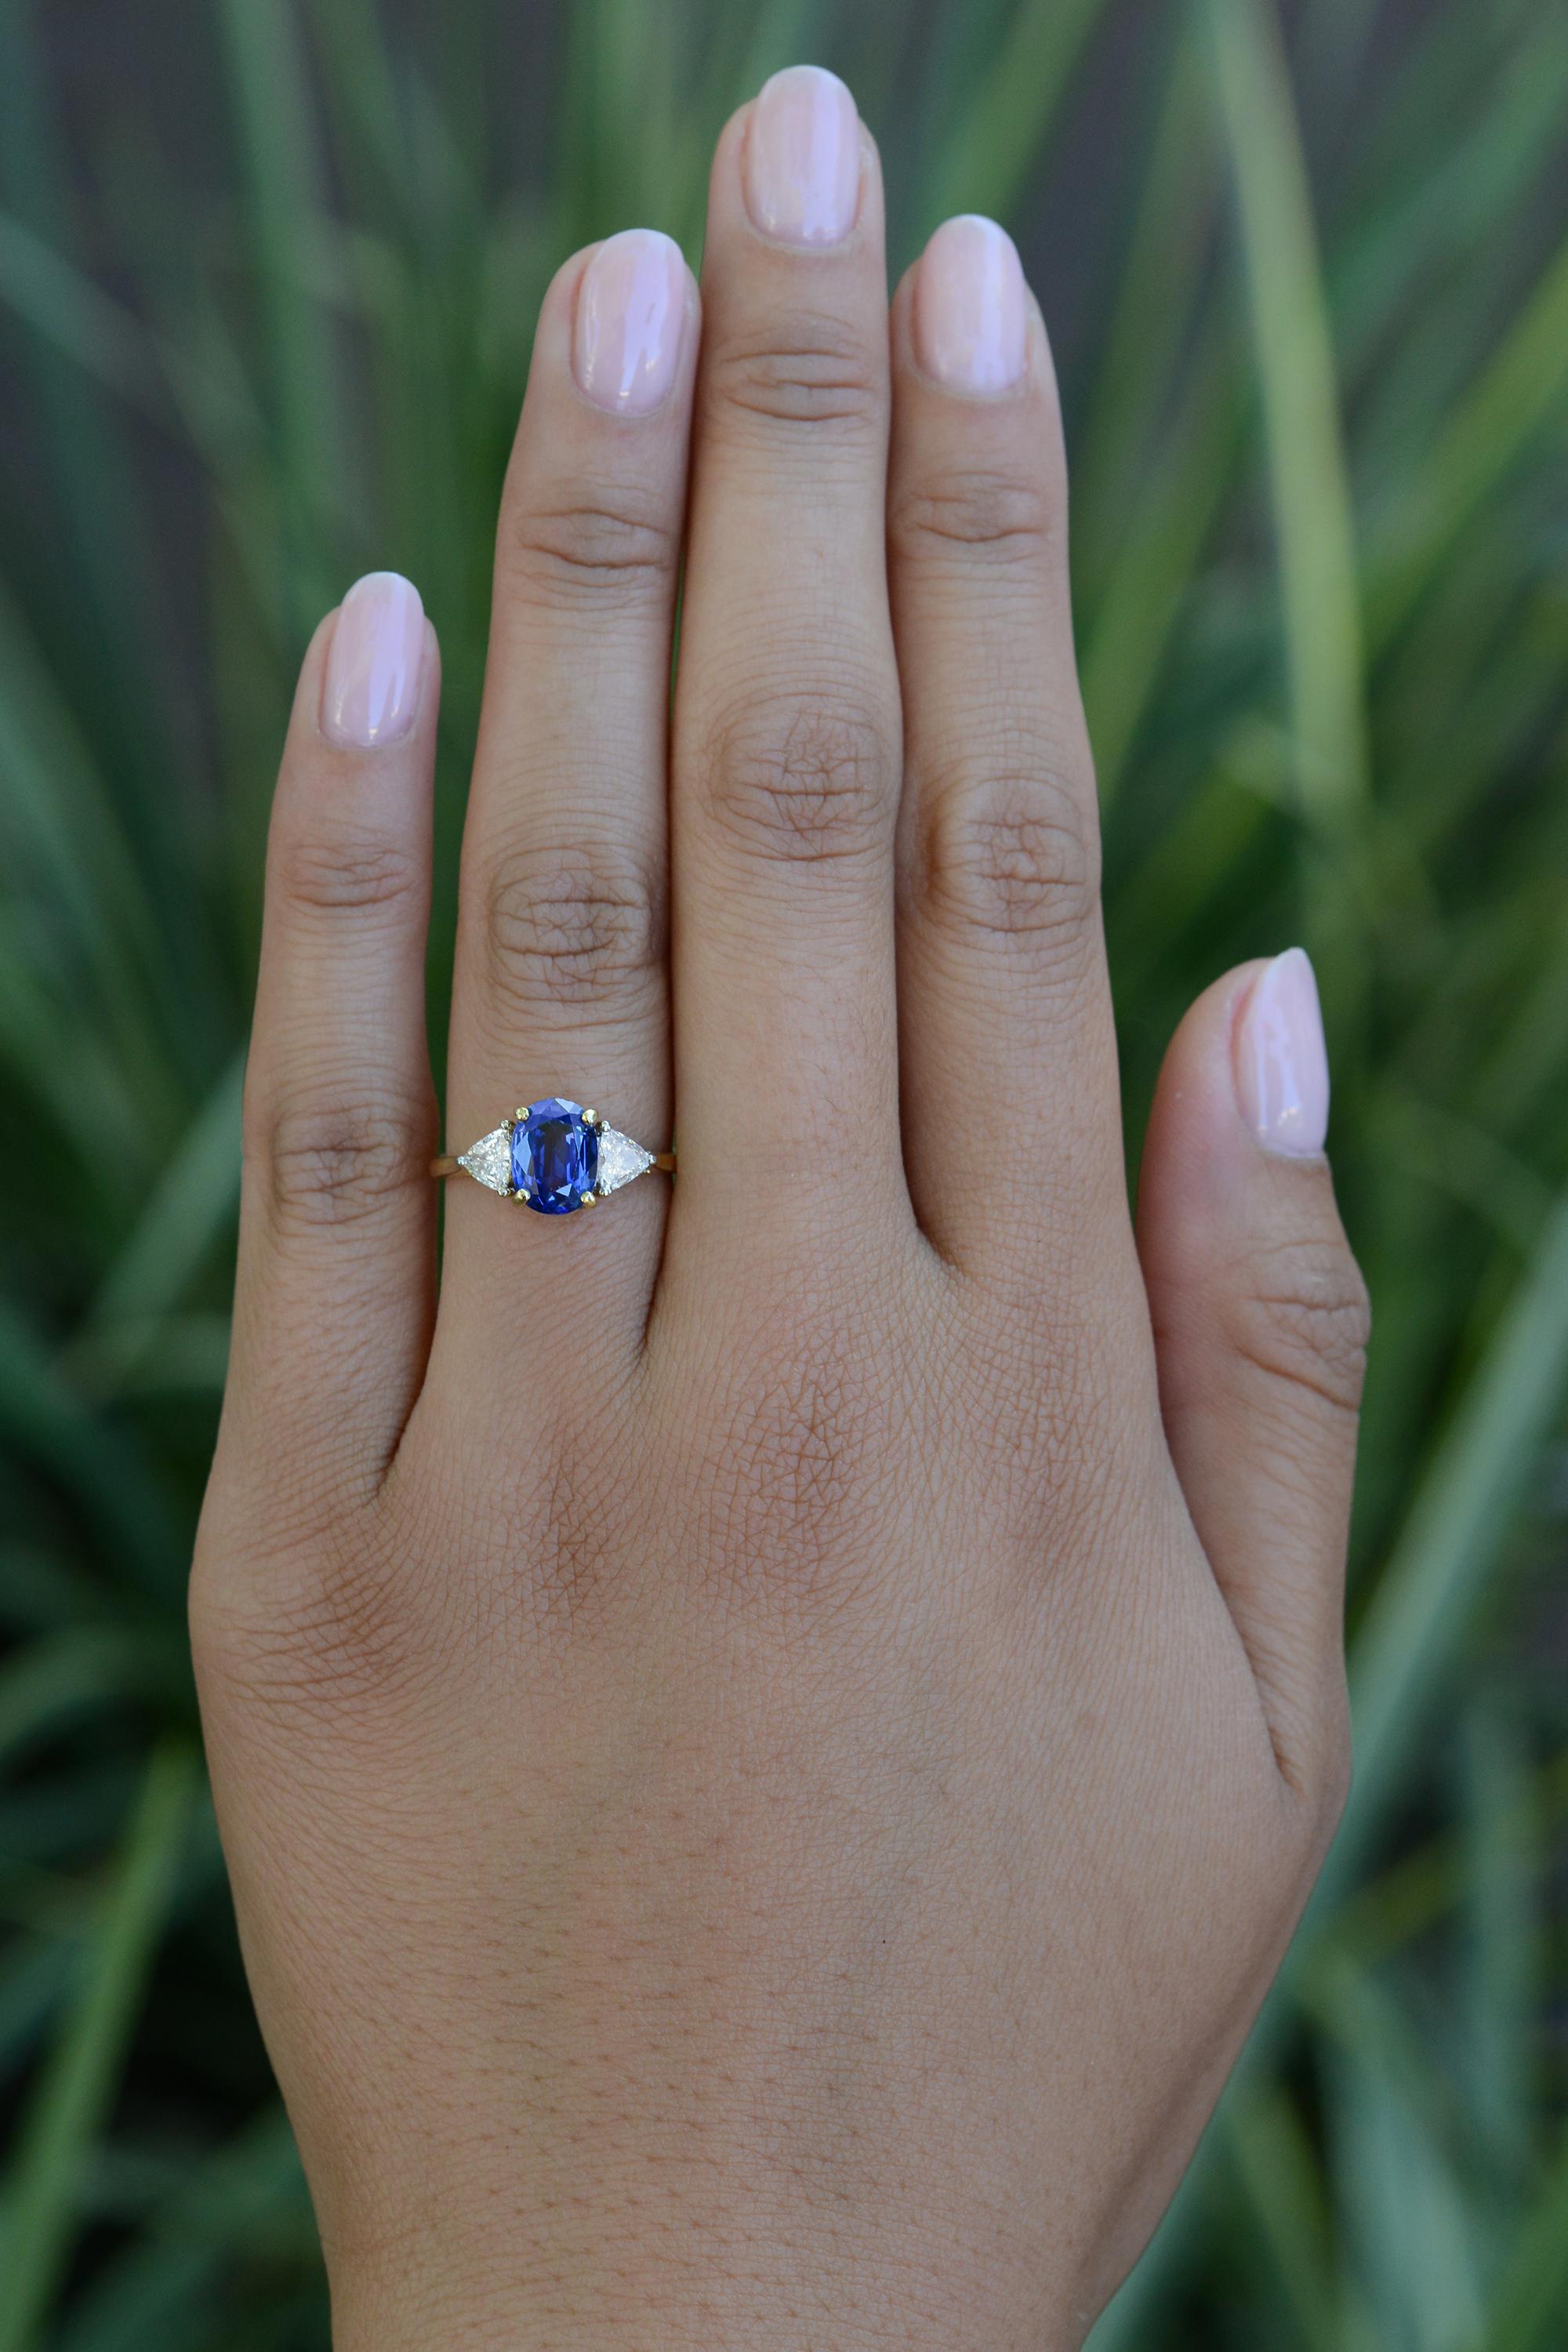 This vintage gemstone engagement ring radiates a classic contemporary design. The focal point, a prominent 2 carat Ceylon sapphire with violet undertones and lovely, vivid blue flashes. Crafted in 18 karat yellow gold, the shouldering half carat